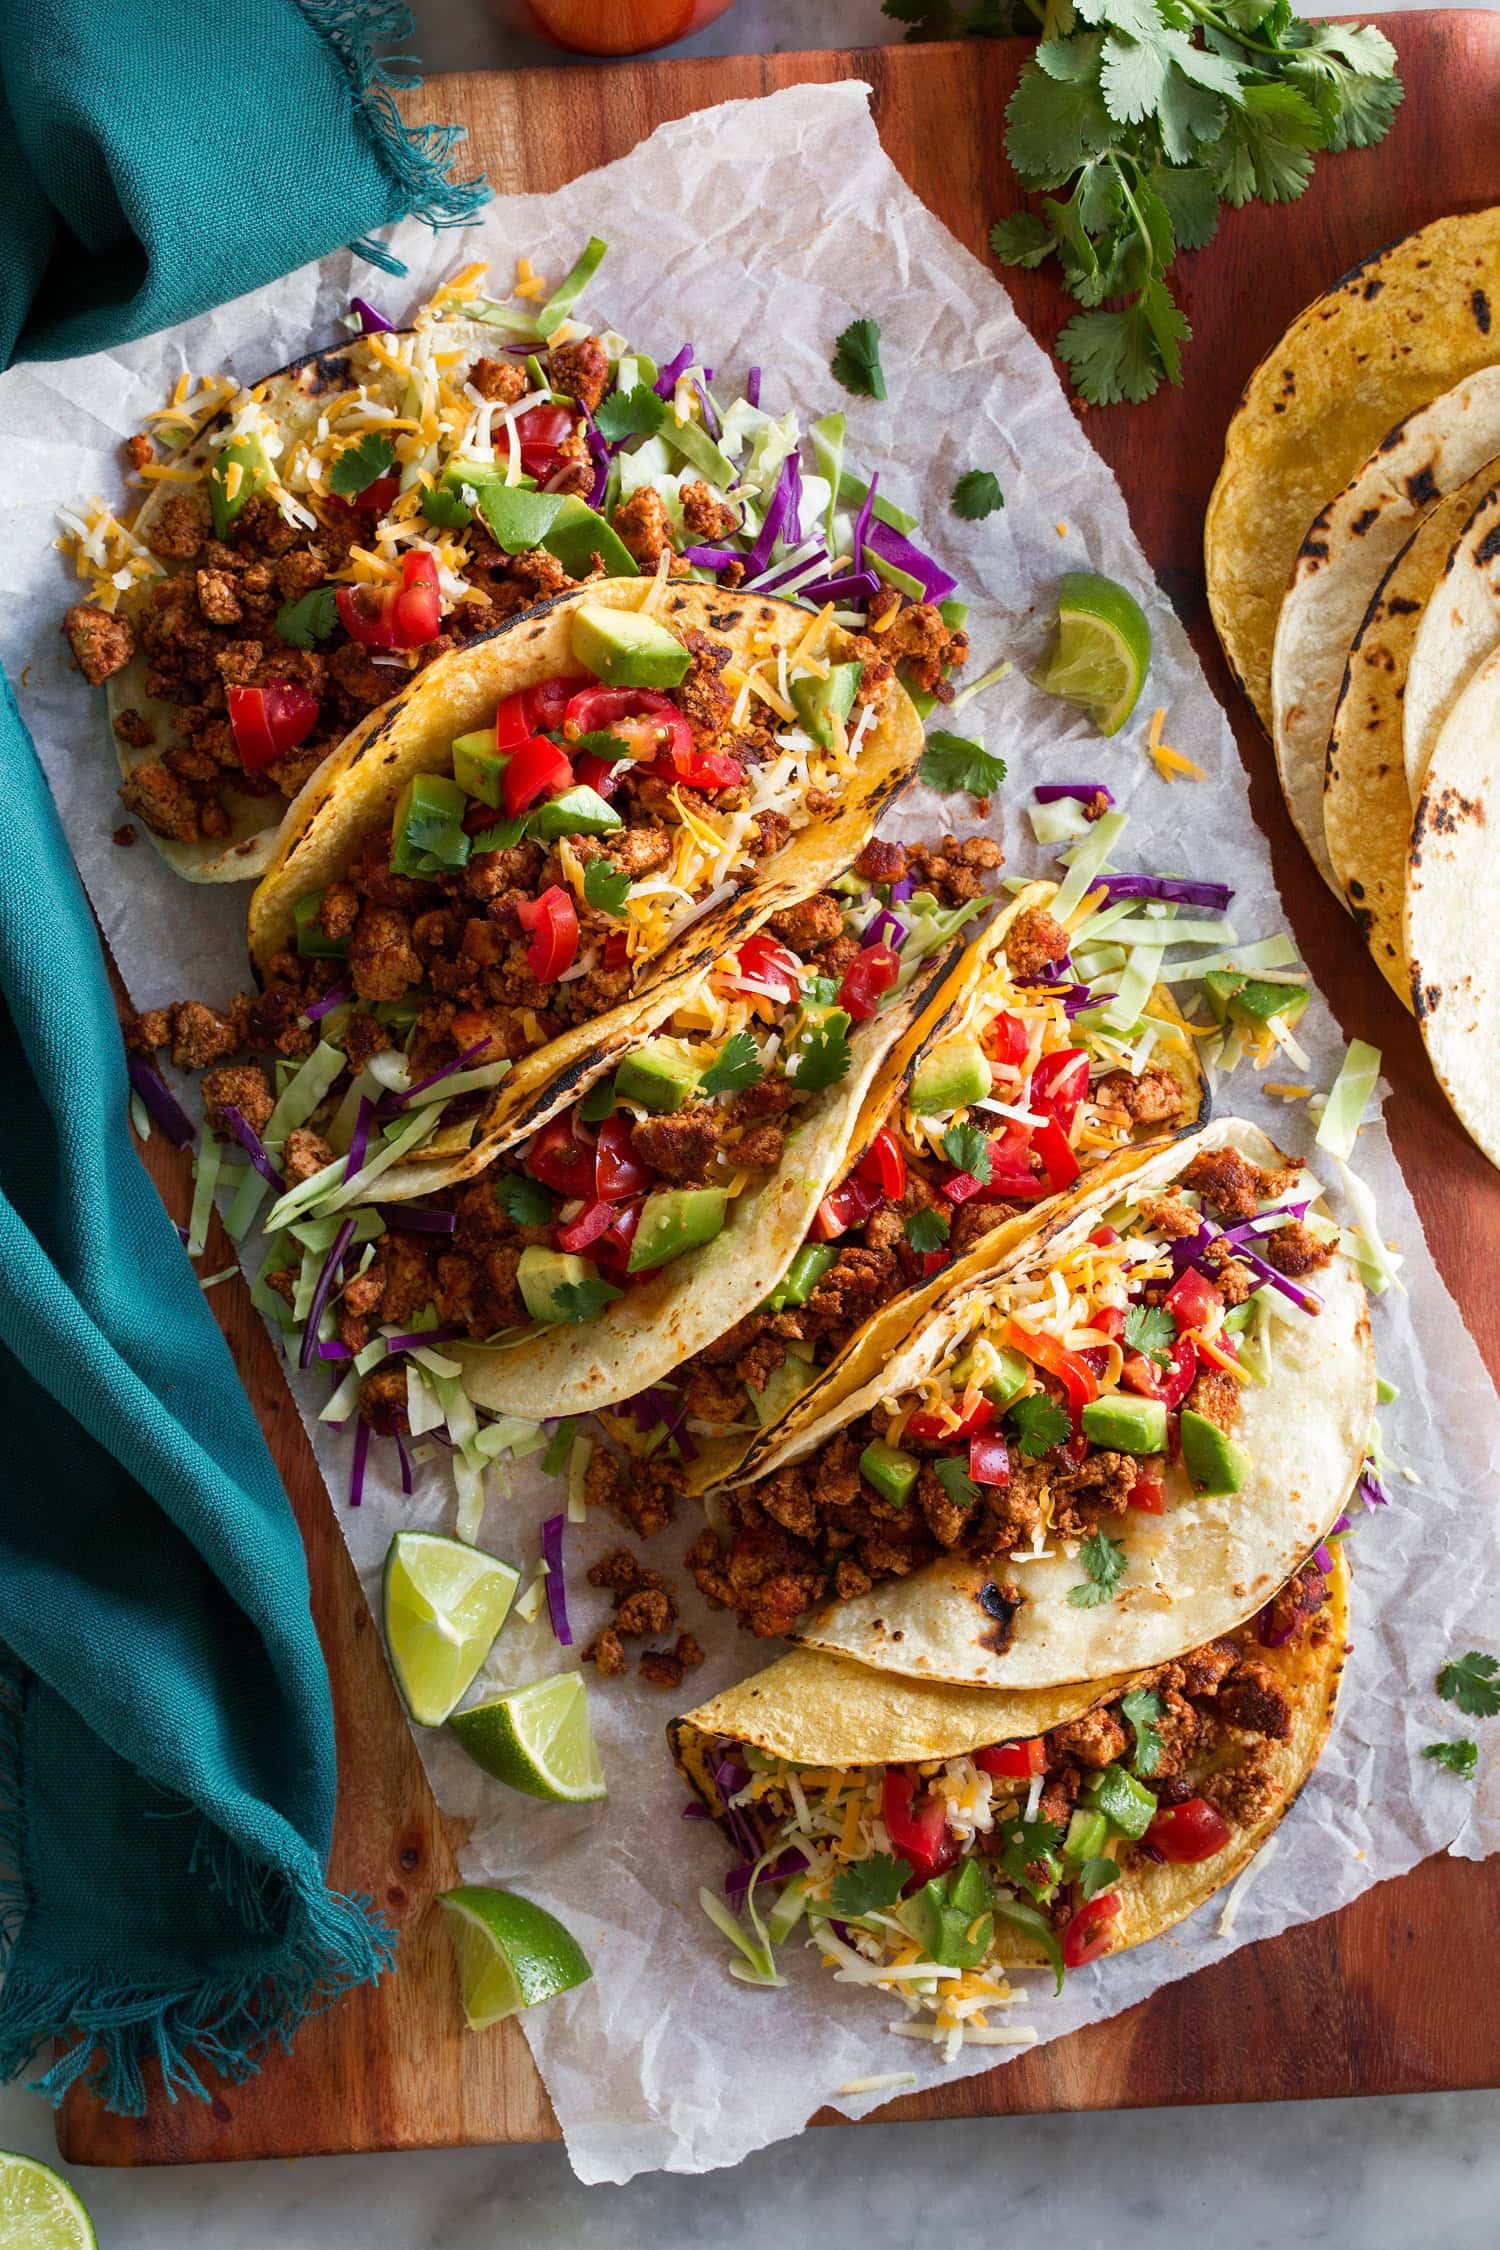 Crumbled tofu meat tacos with toppings of cabbage, tomatoes, cilantro and cheese.